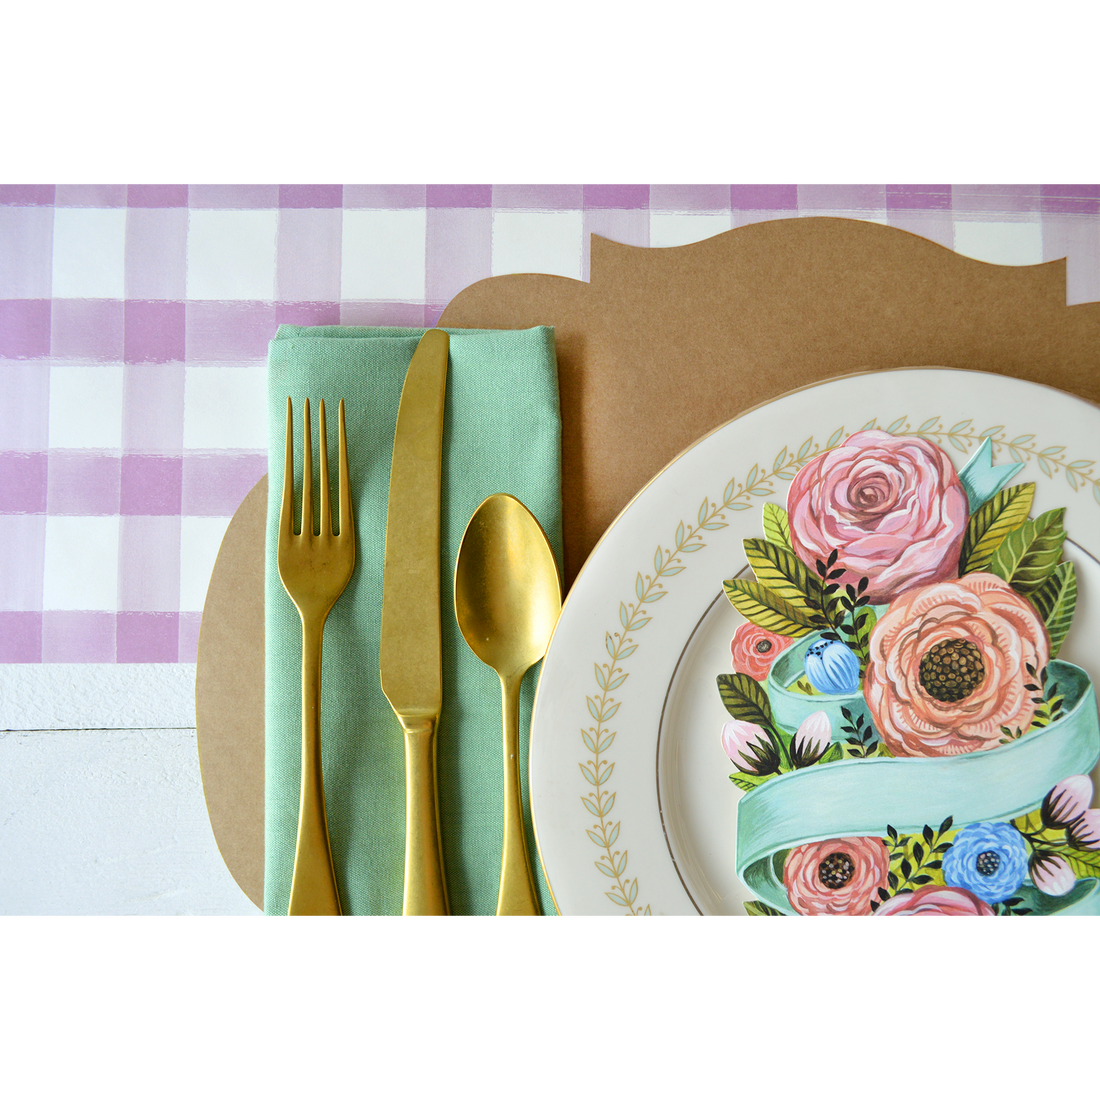 Spring Floral Table Accent